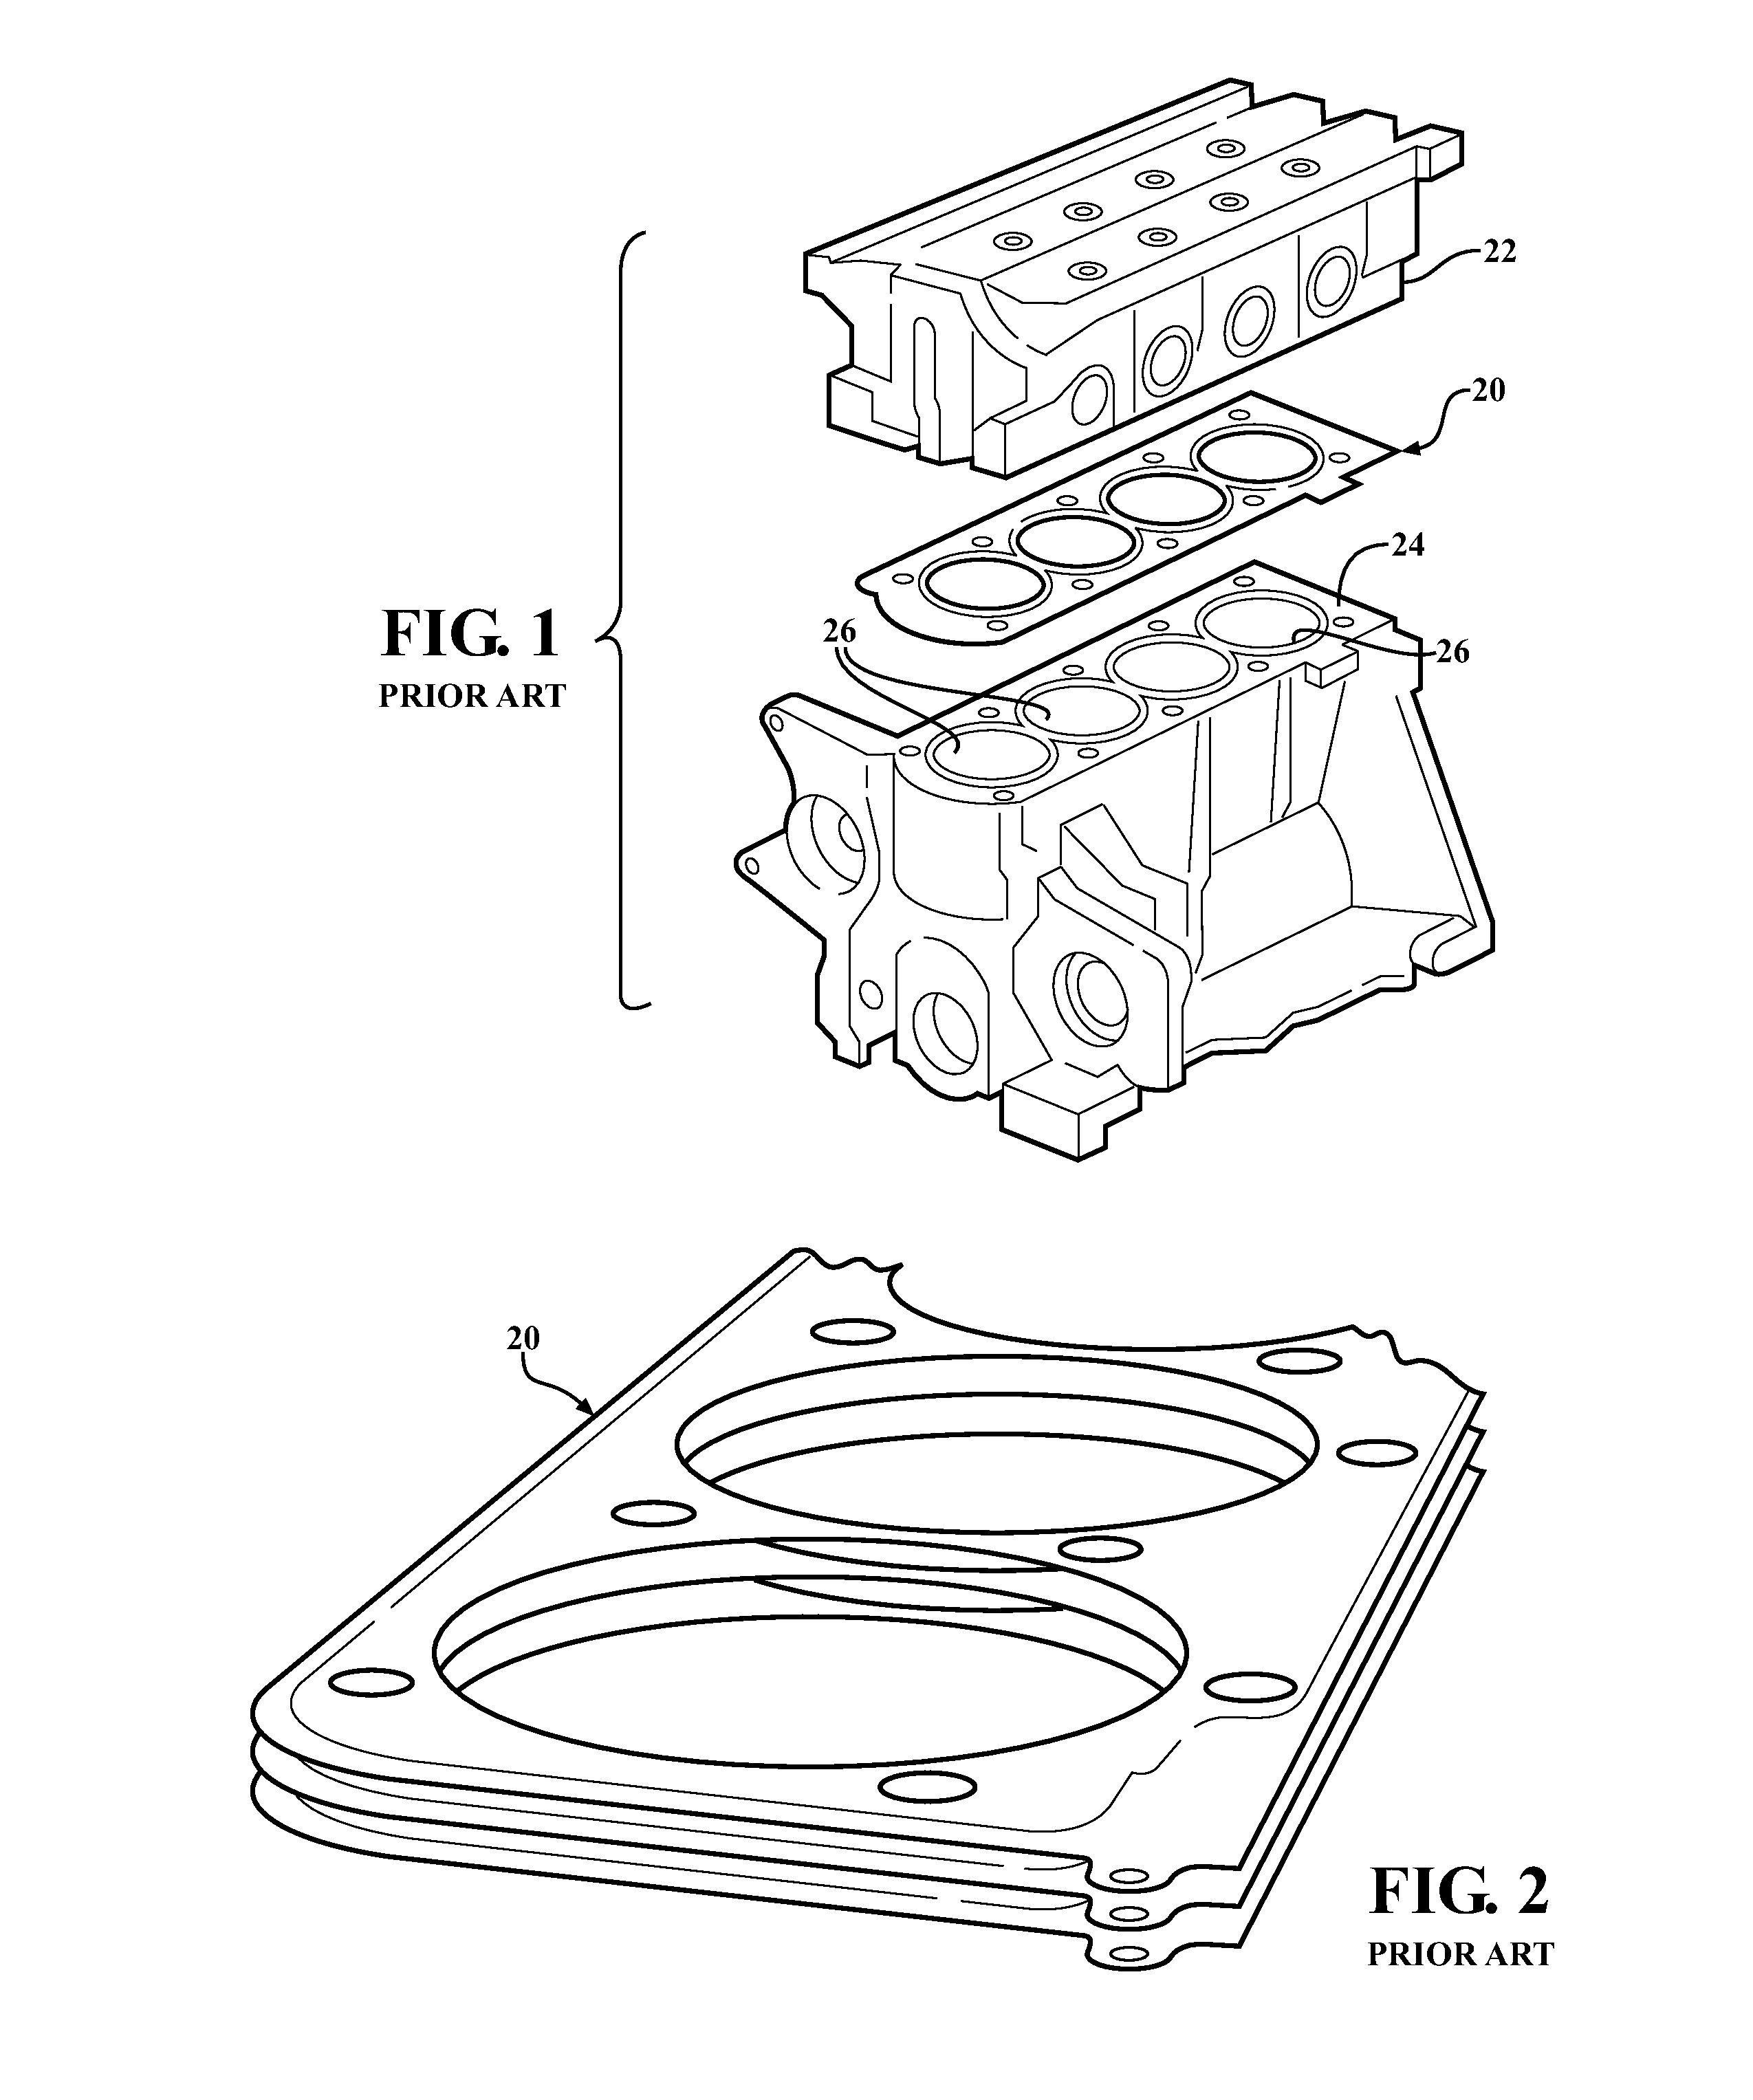 Multilayer gasket with segmented integral stopper feature